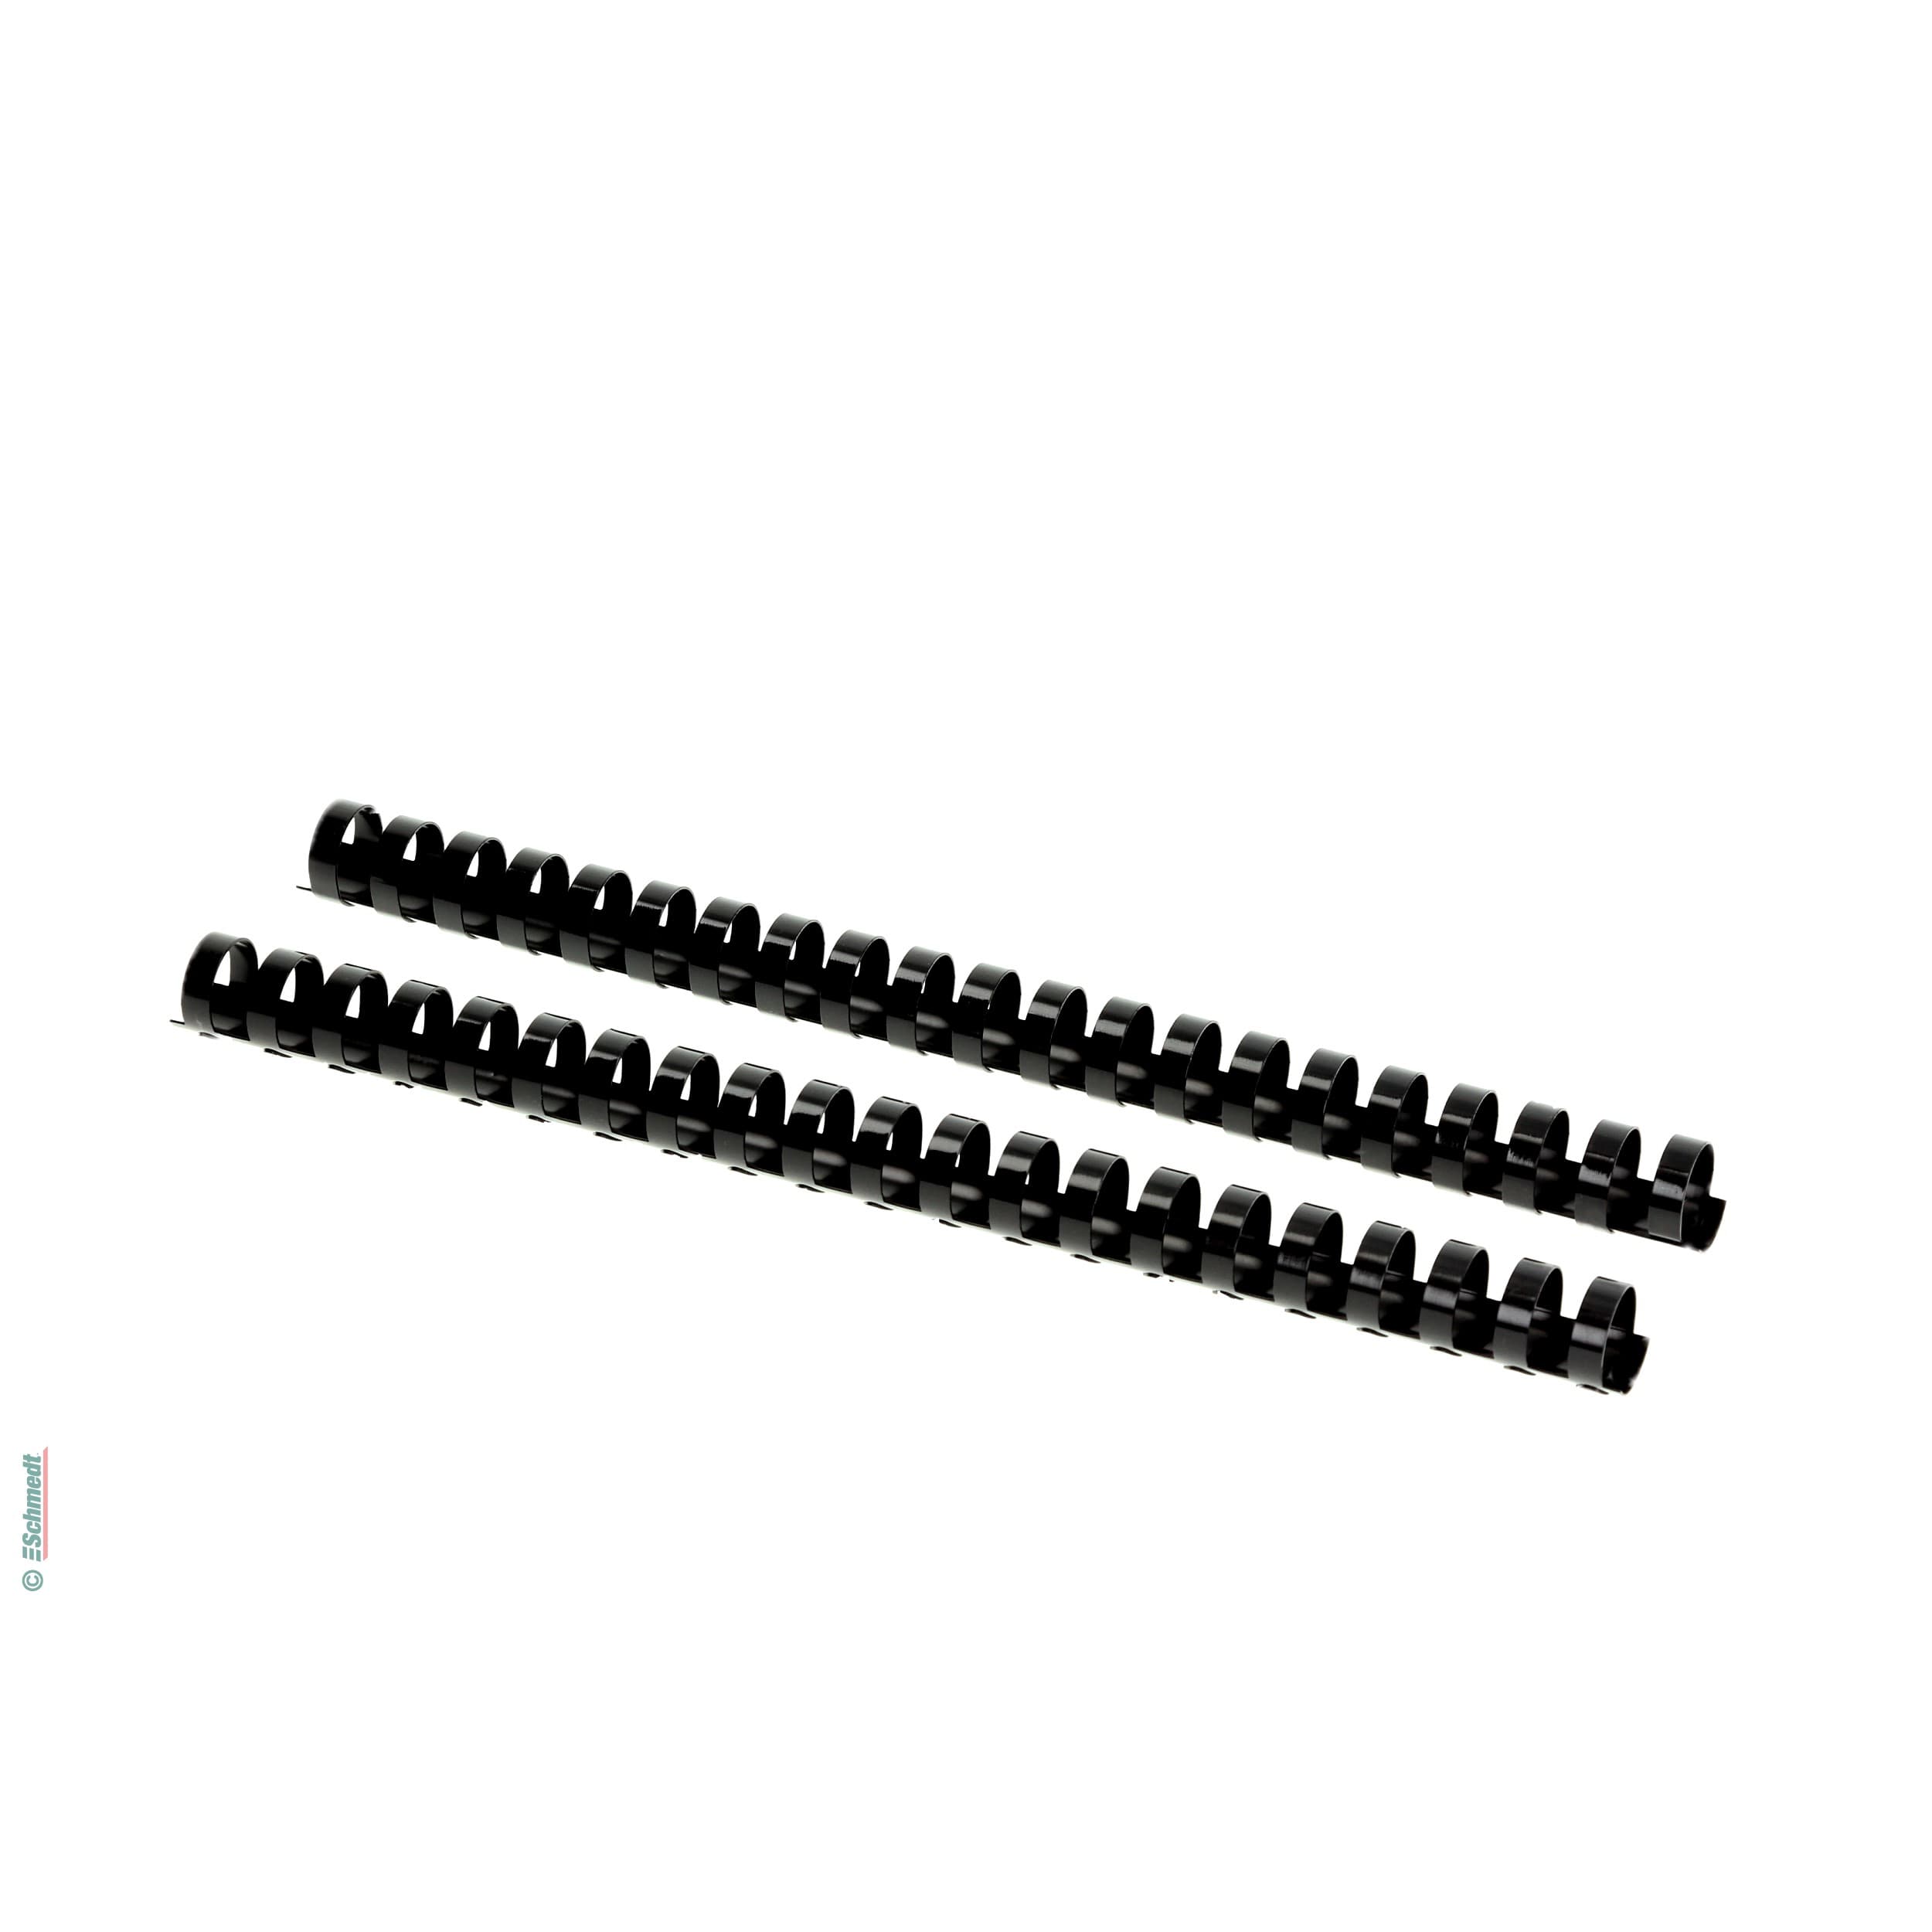 Plastic binding combs - round - Diameter (in mm) 19 - Colour black - to be processed in plastic-comb binding machines... - image-2